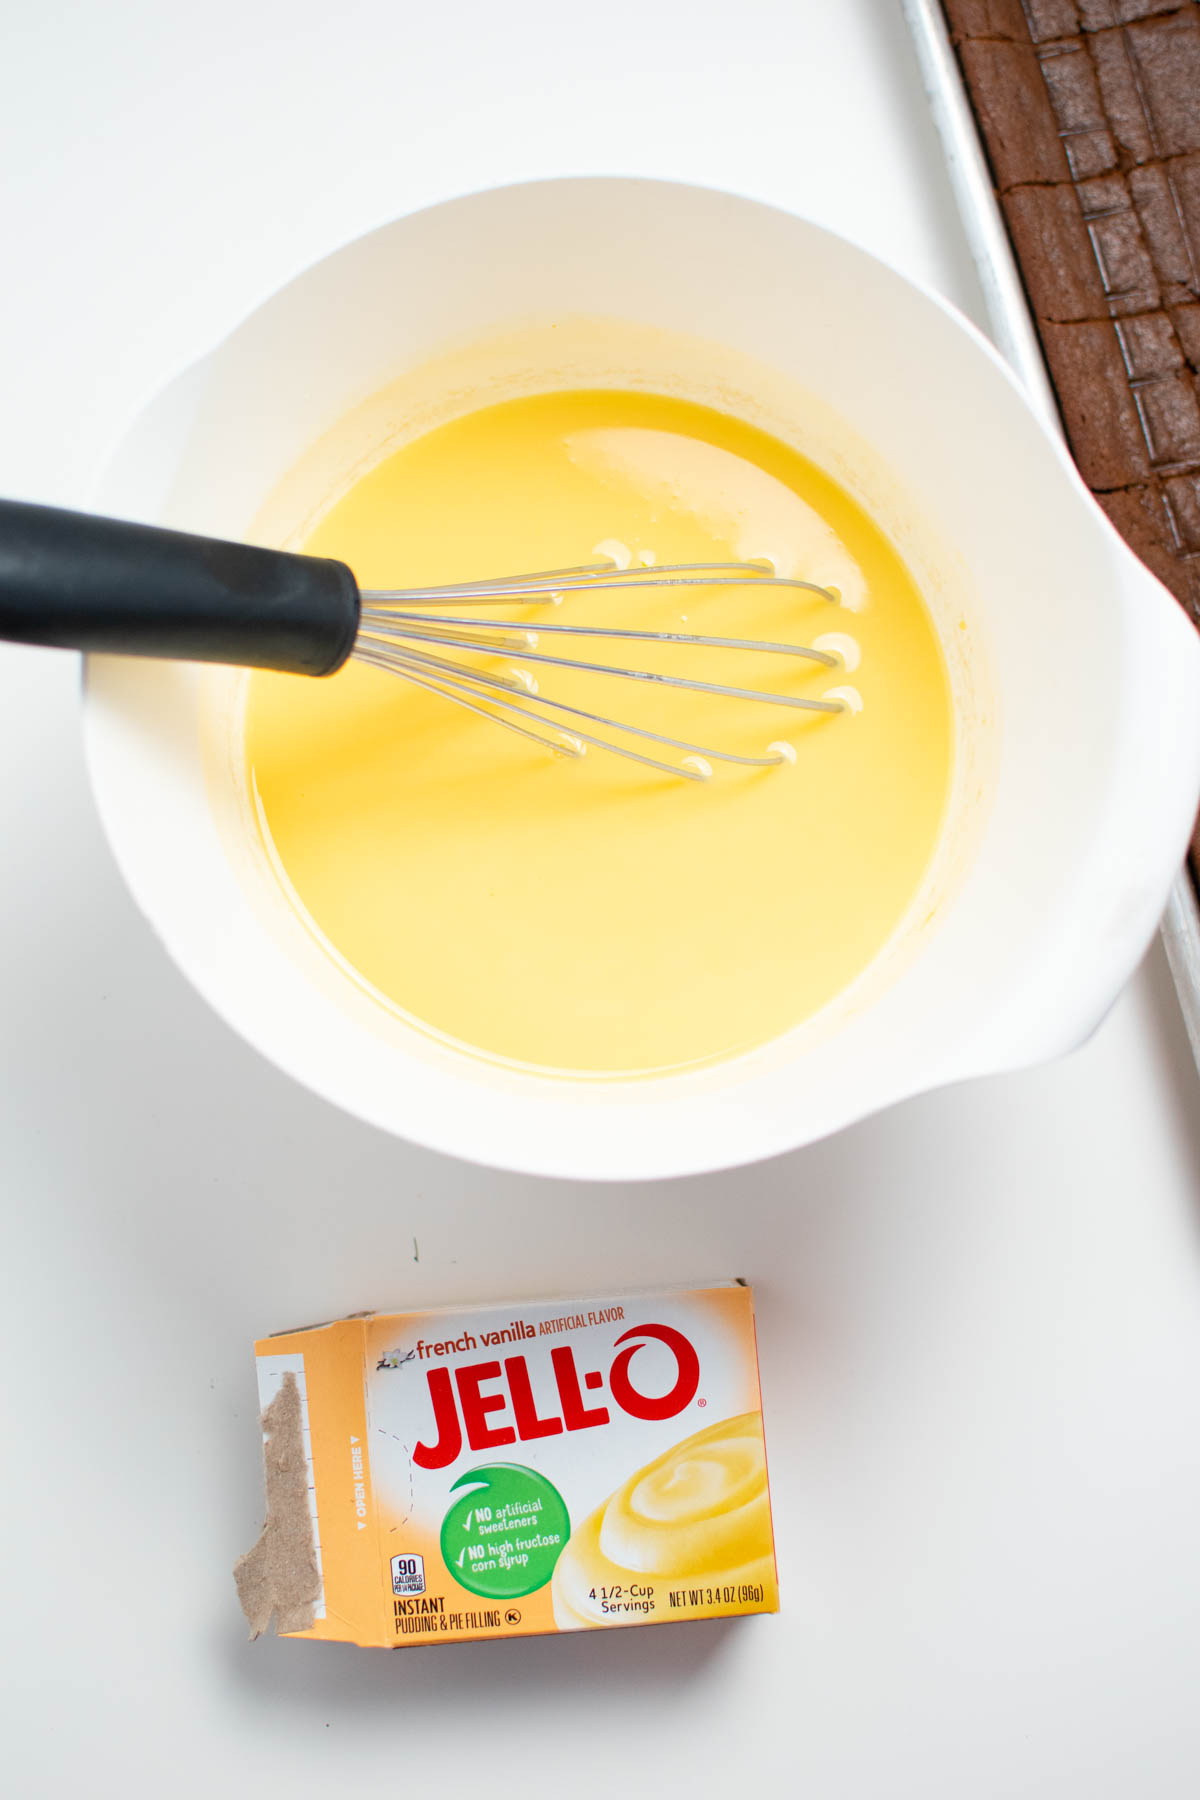 Vanilla pudding in white bowl with whisk and empty Jello pudding box nearby.